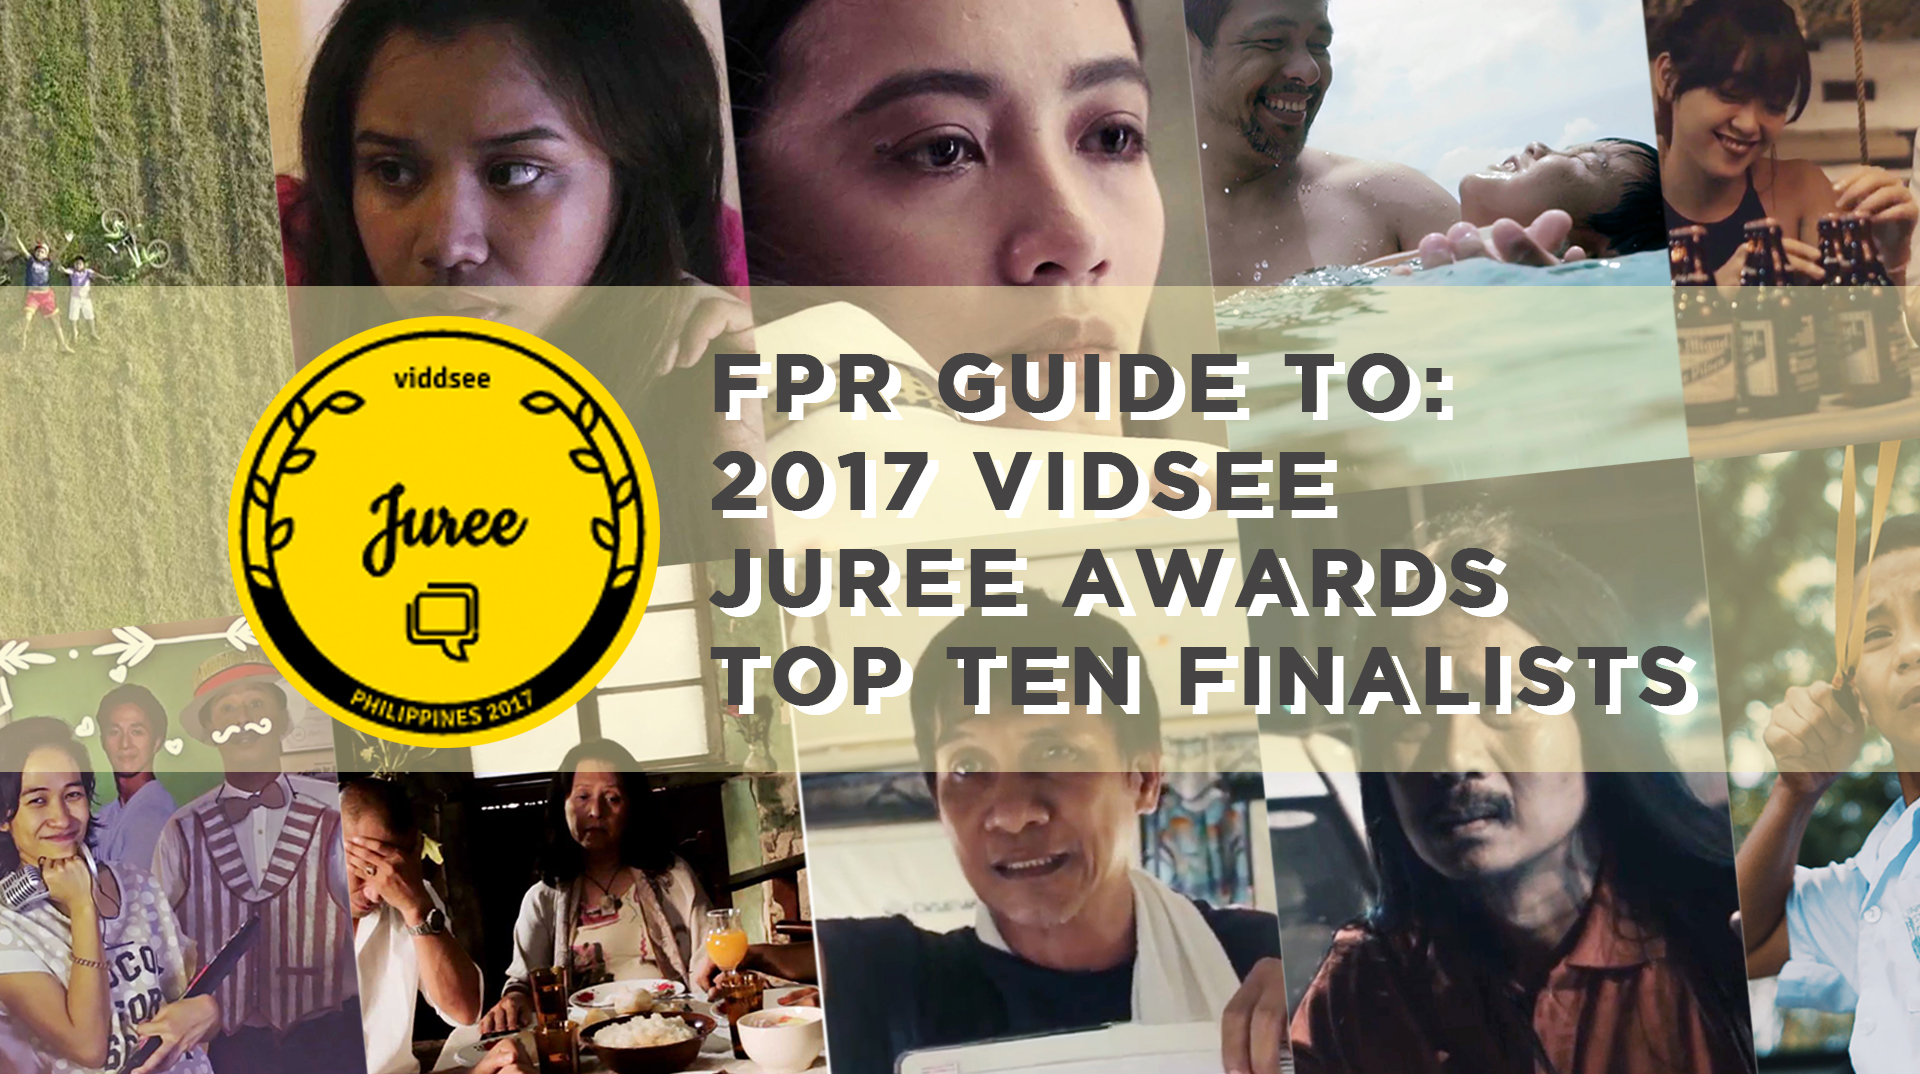 2017 Viddsee Juree Awards Top 10 Finalists Announced